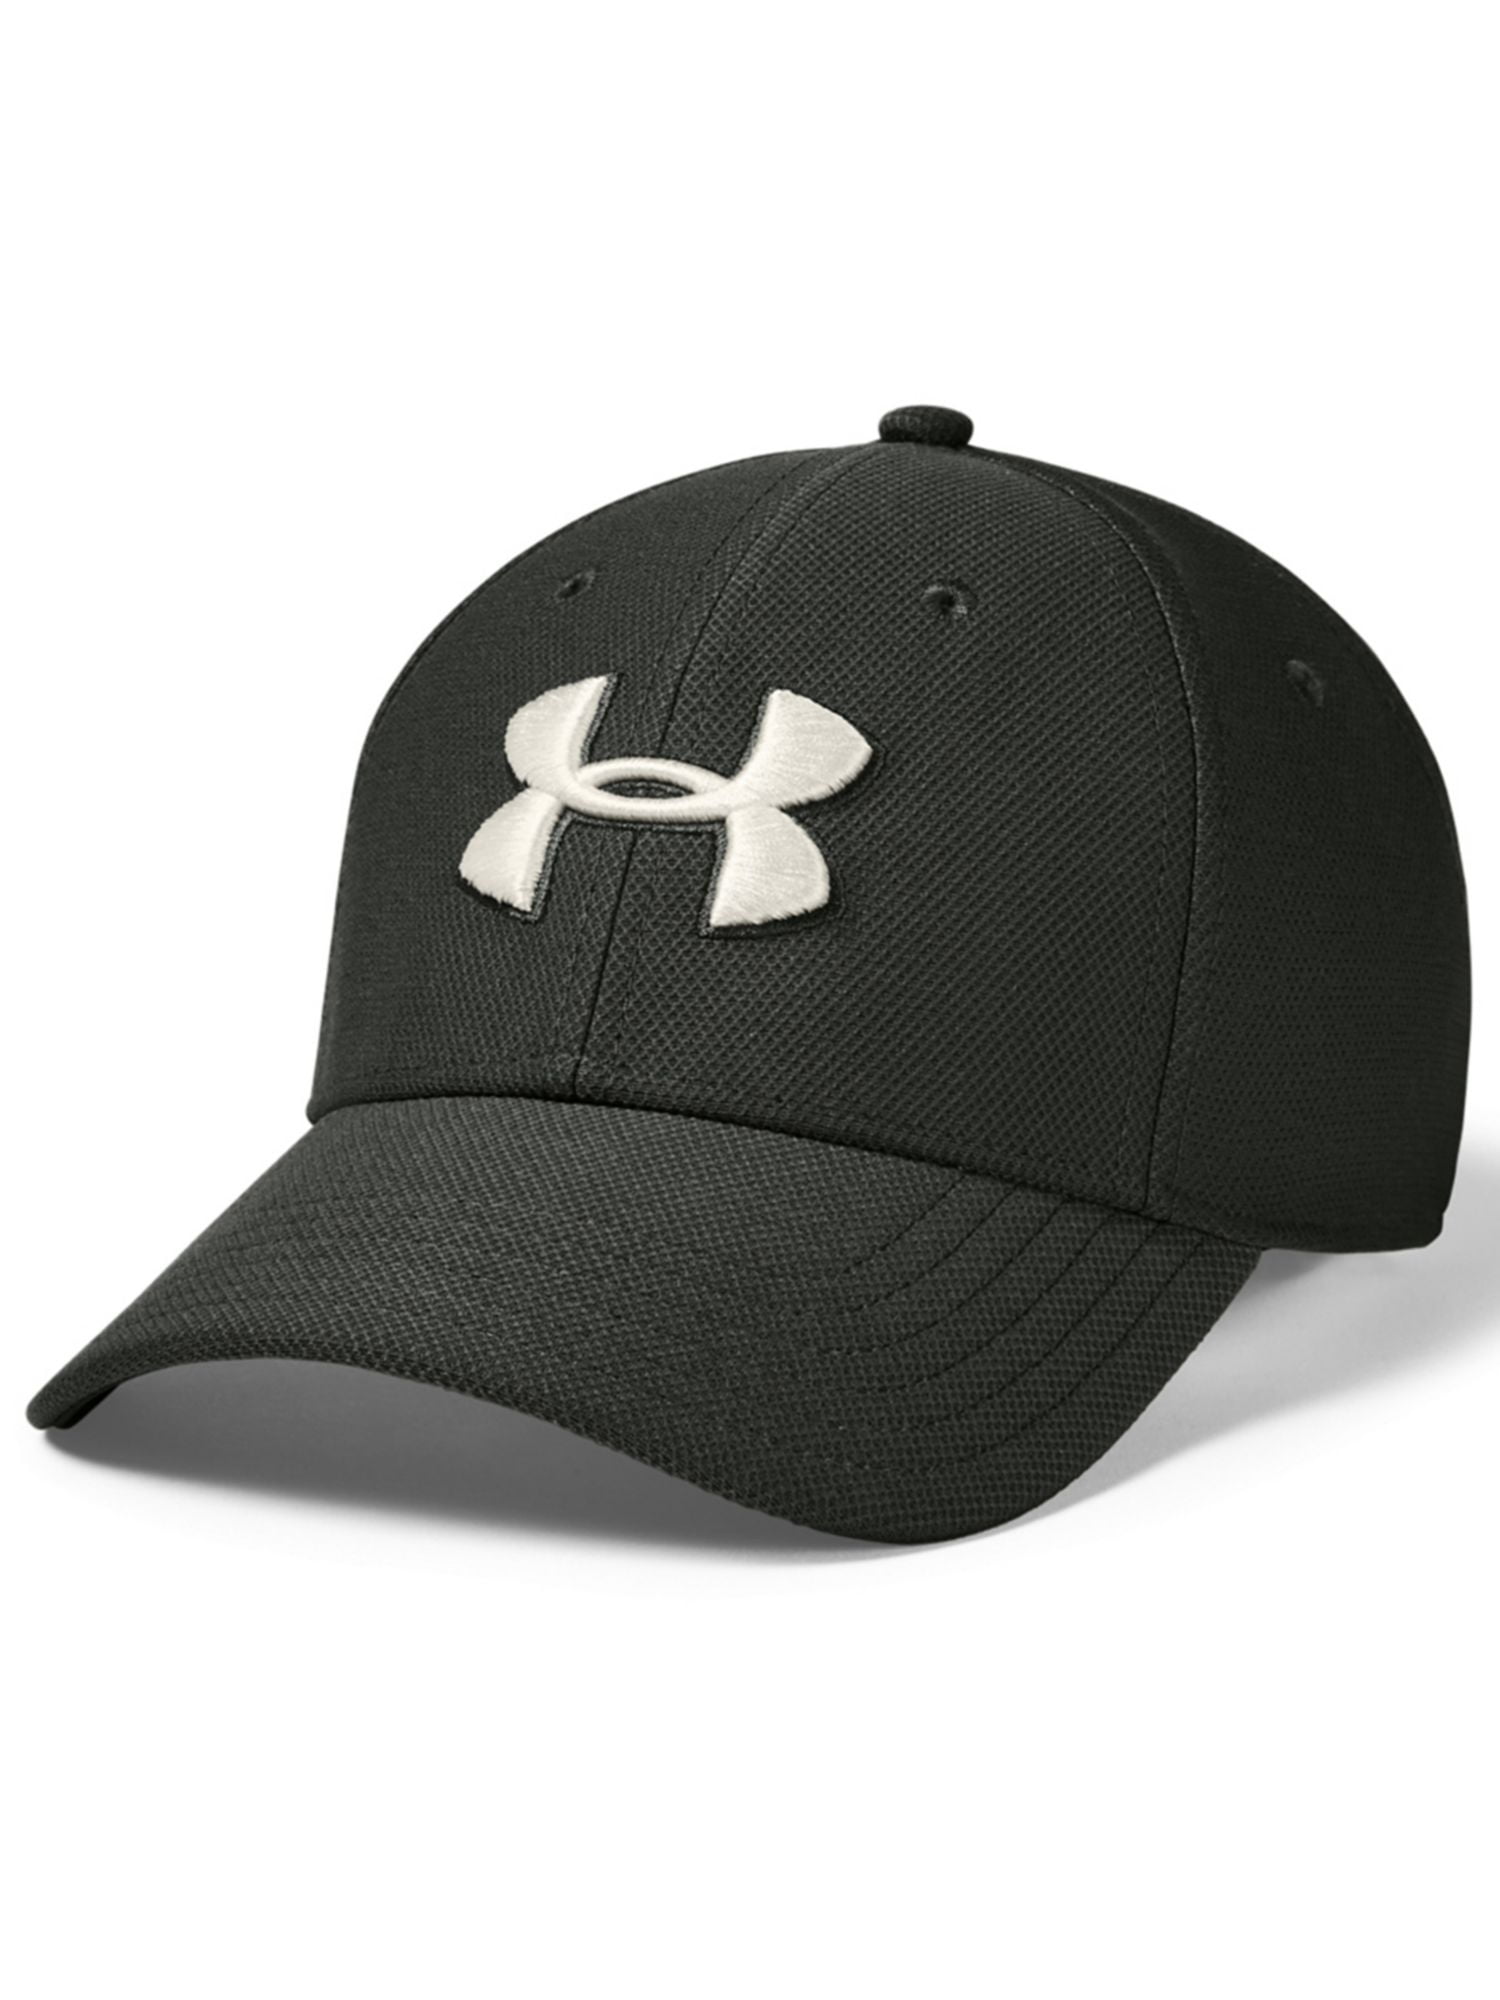 UNDER ARMOUR Mens Green Logo Polyester Fitted Baseball Ball Cap Hat M\L